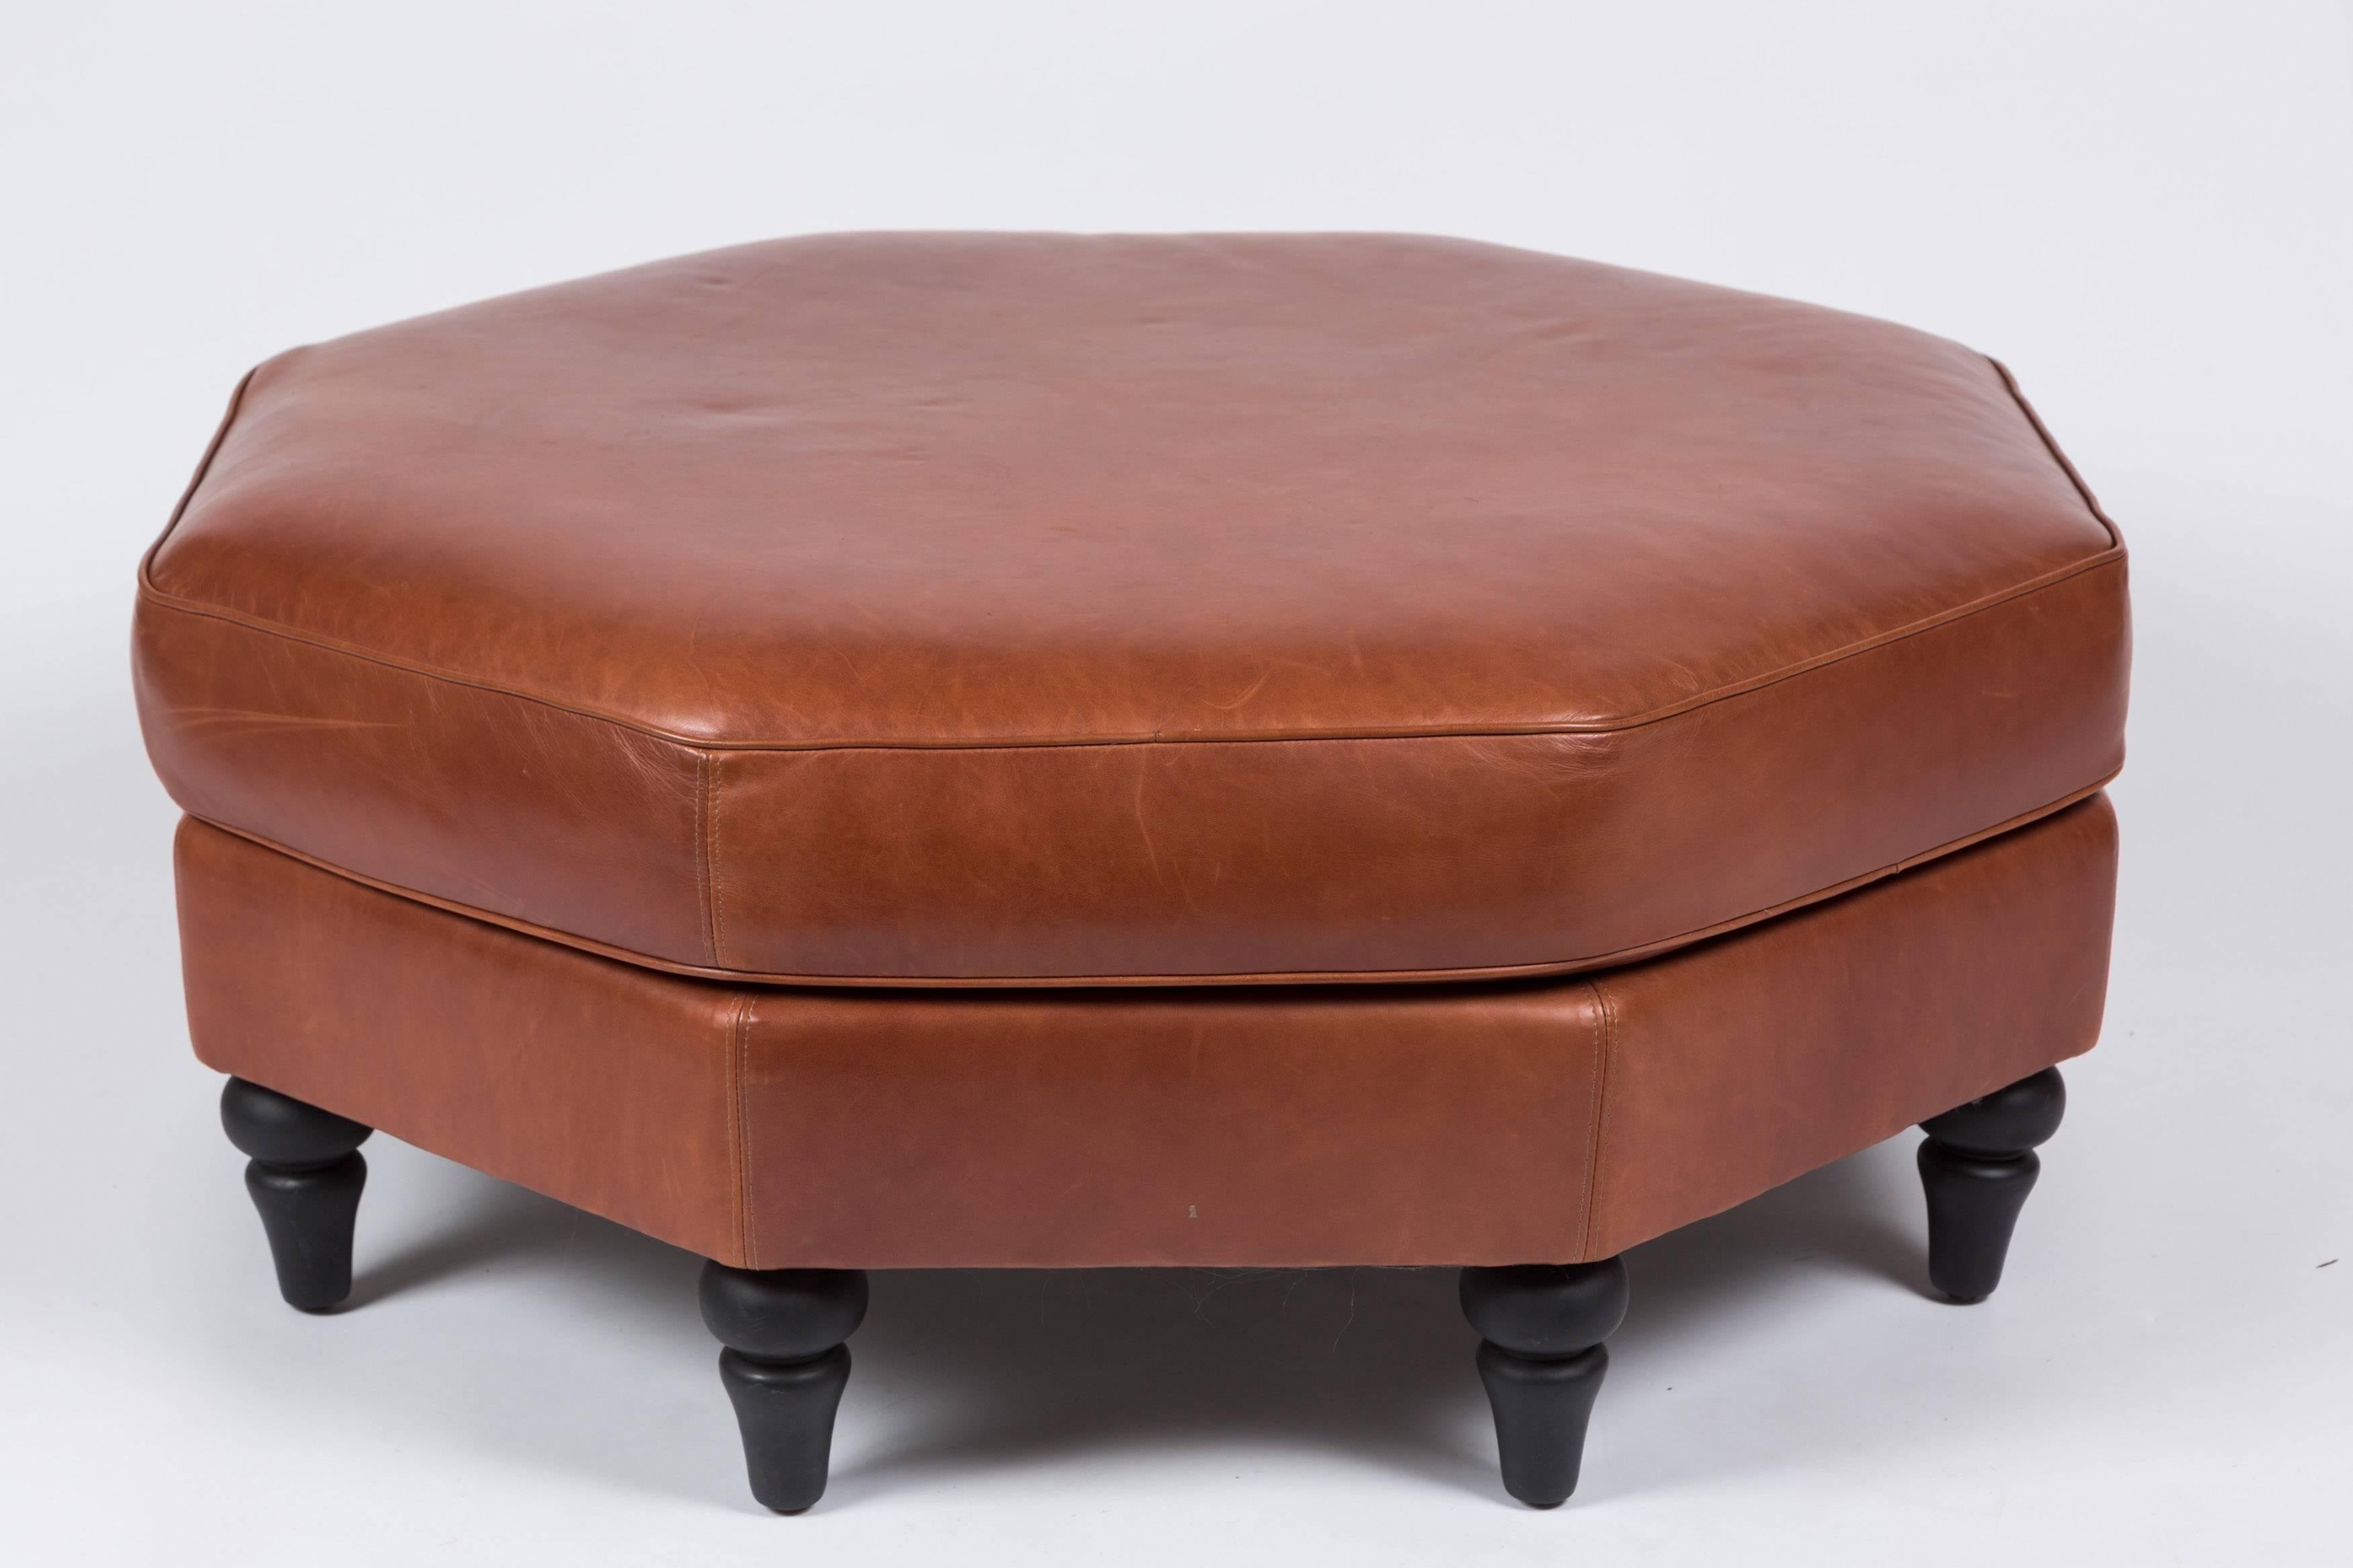 Large octagonal leather ottoman with turned wood legs upholstered in Moore & Giles Diablo in Cognac. 